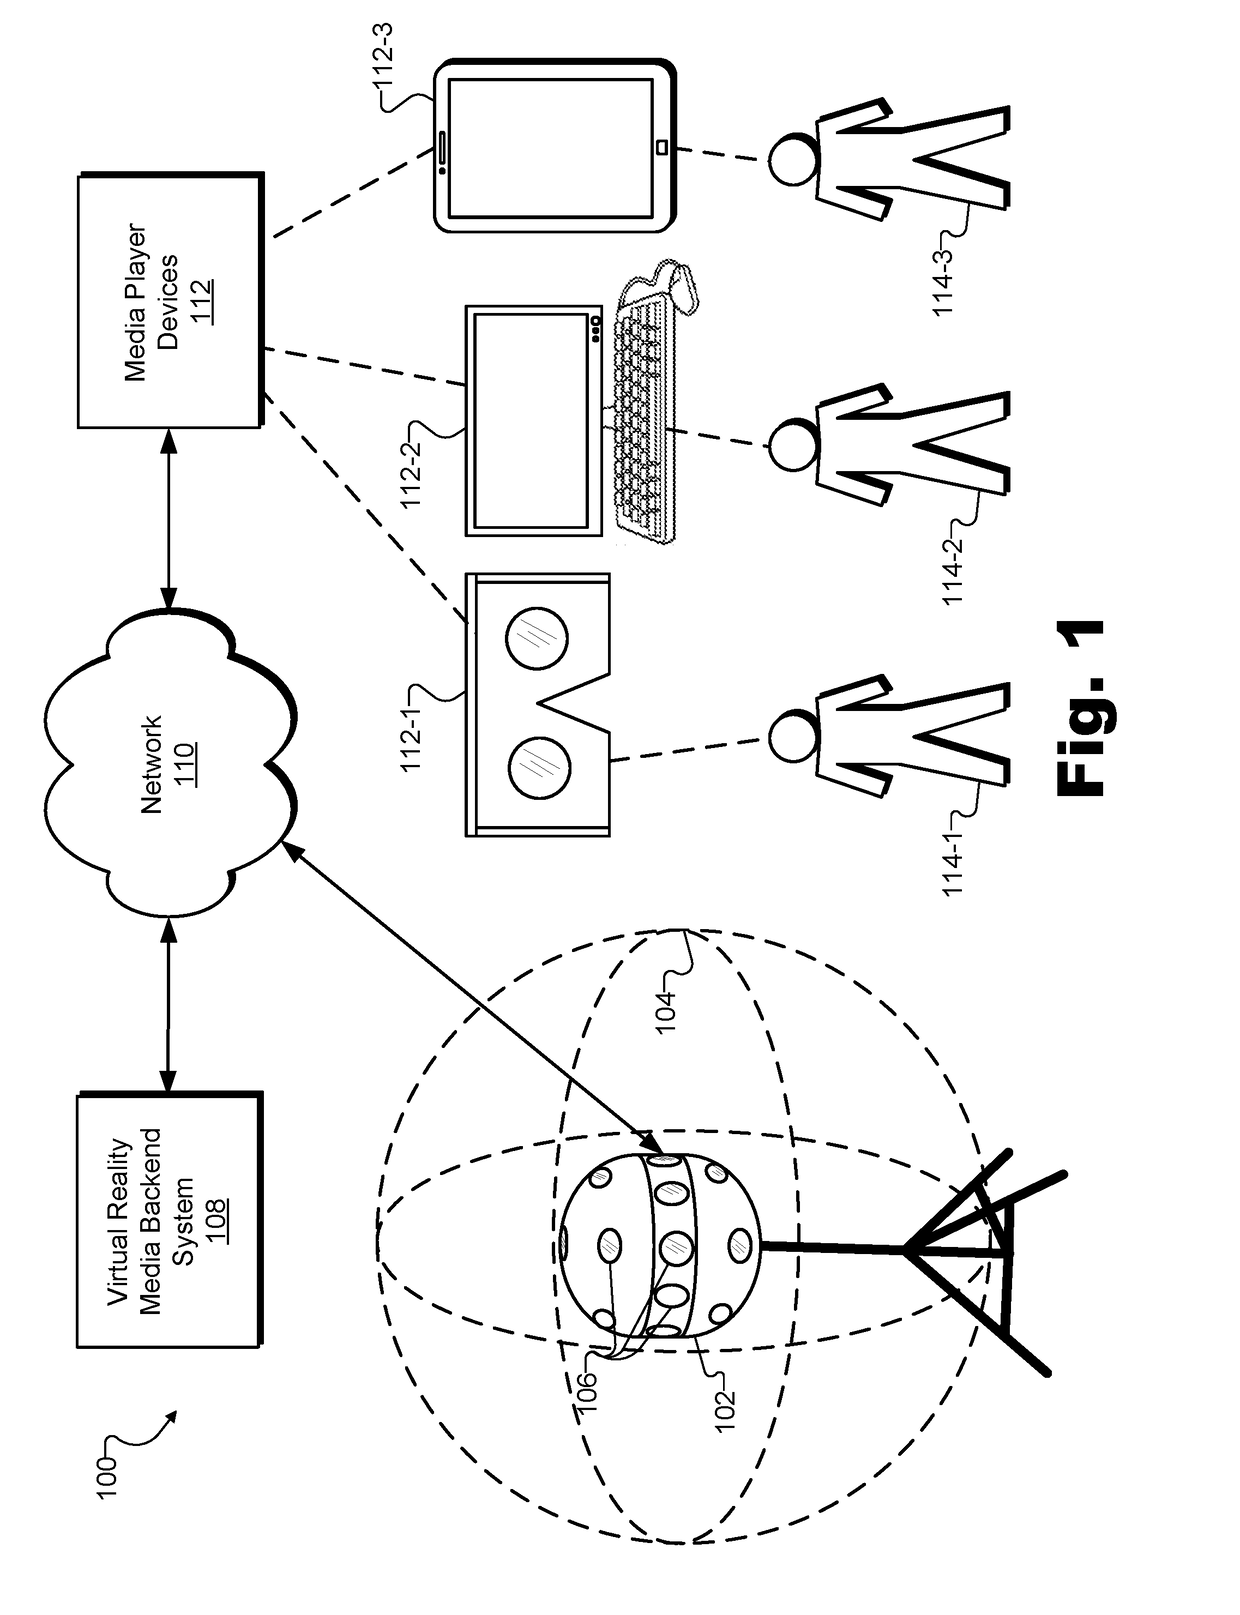 Methods and Systems for Gaze-Based Control of Virtual Reality Media Content